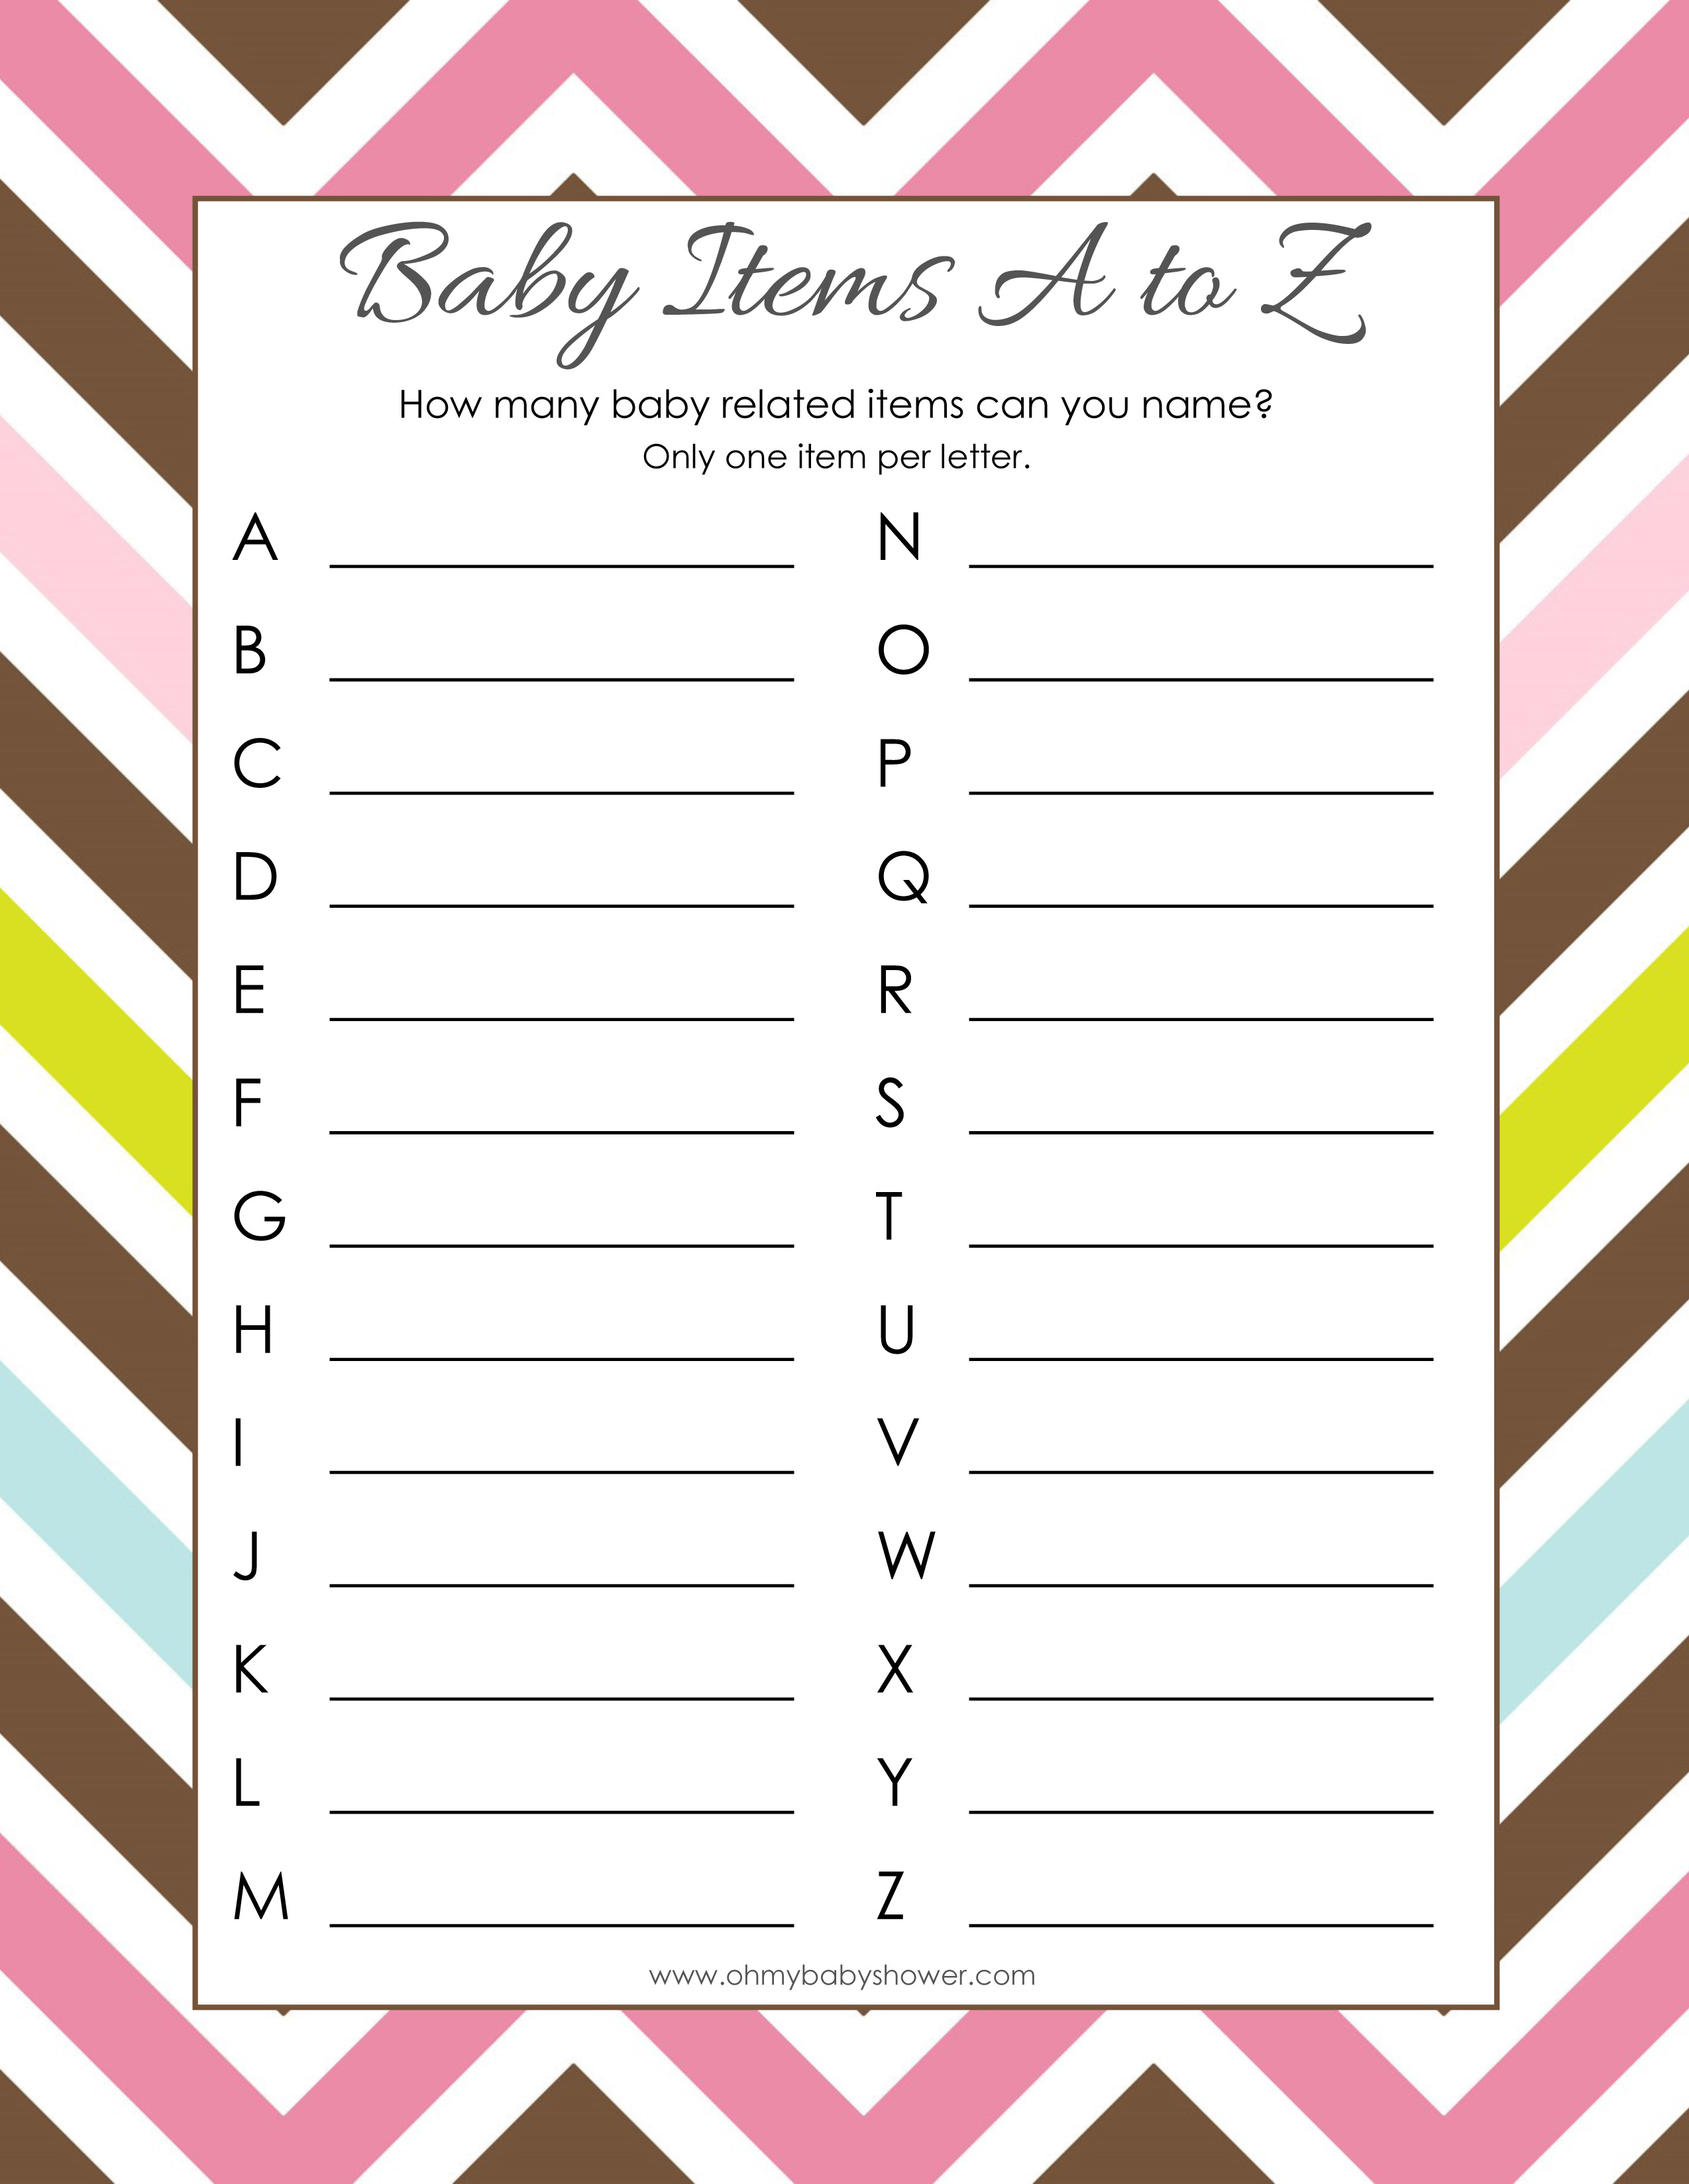 baby items a to z game multi color chevron | Stay at Home Mum.com.au